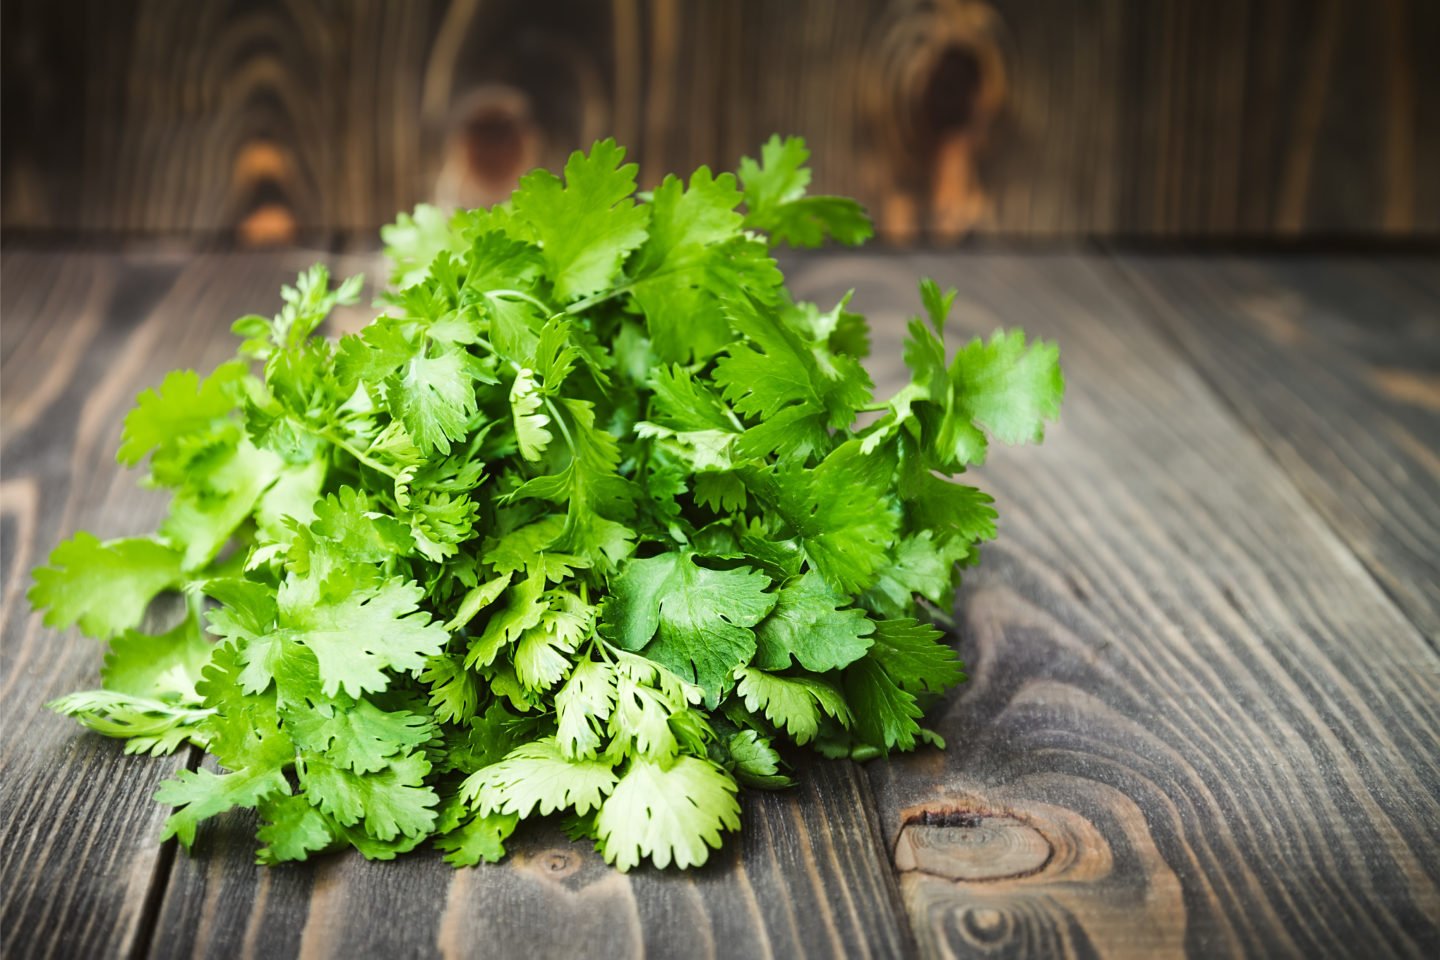 Fresh Coriander Leaves Or Cilantro On Wooden Surface